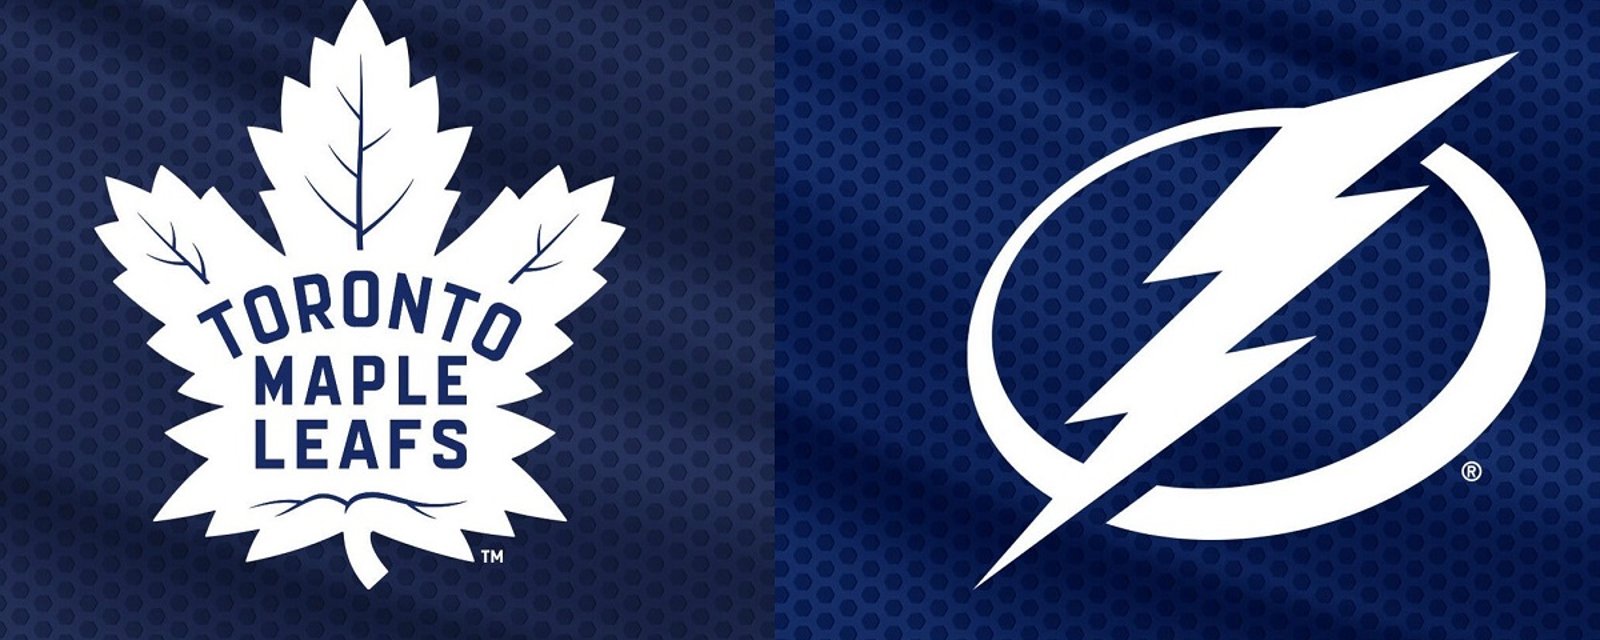 Full lineups for Maple Leafs vs Lightning on Saturday.